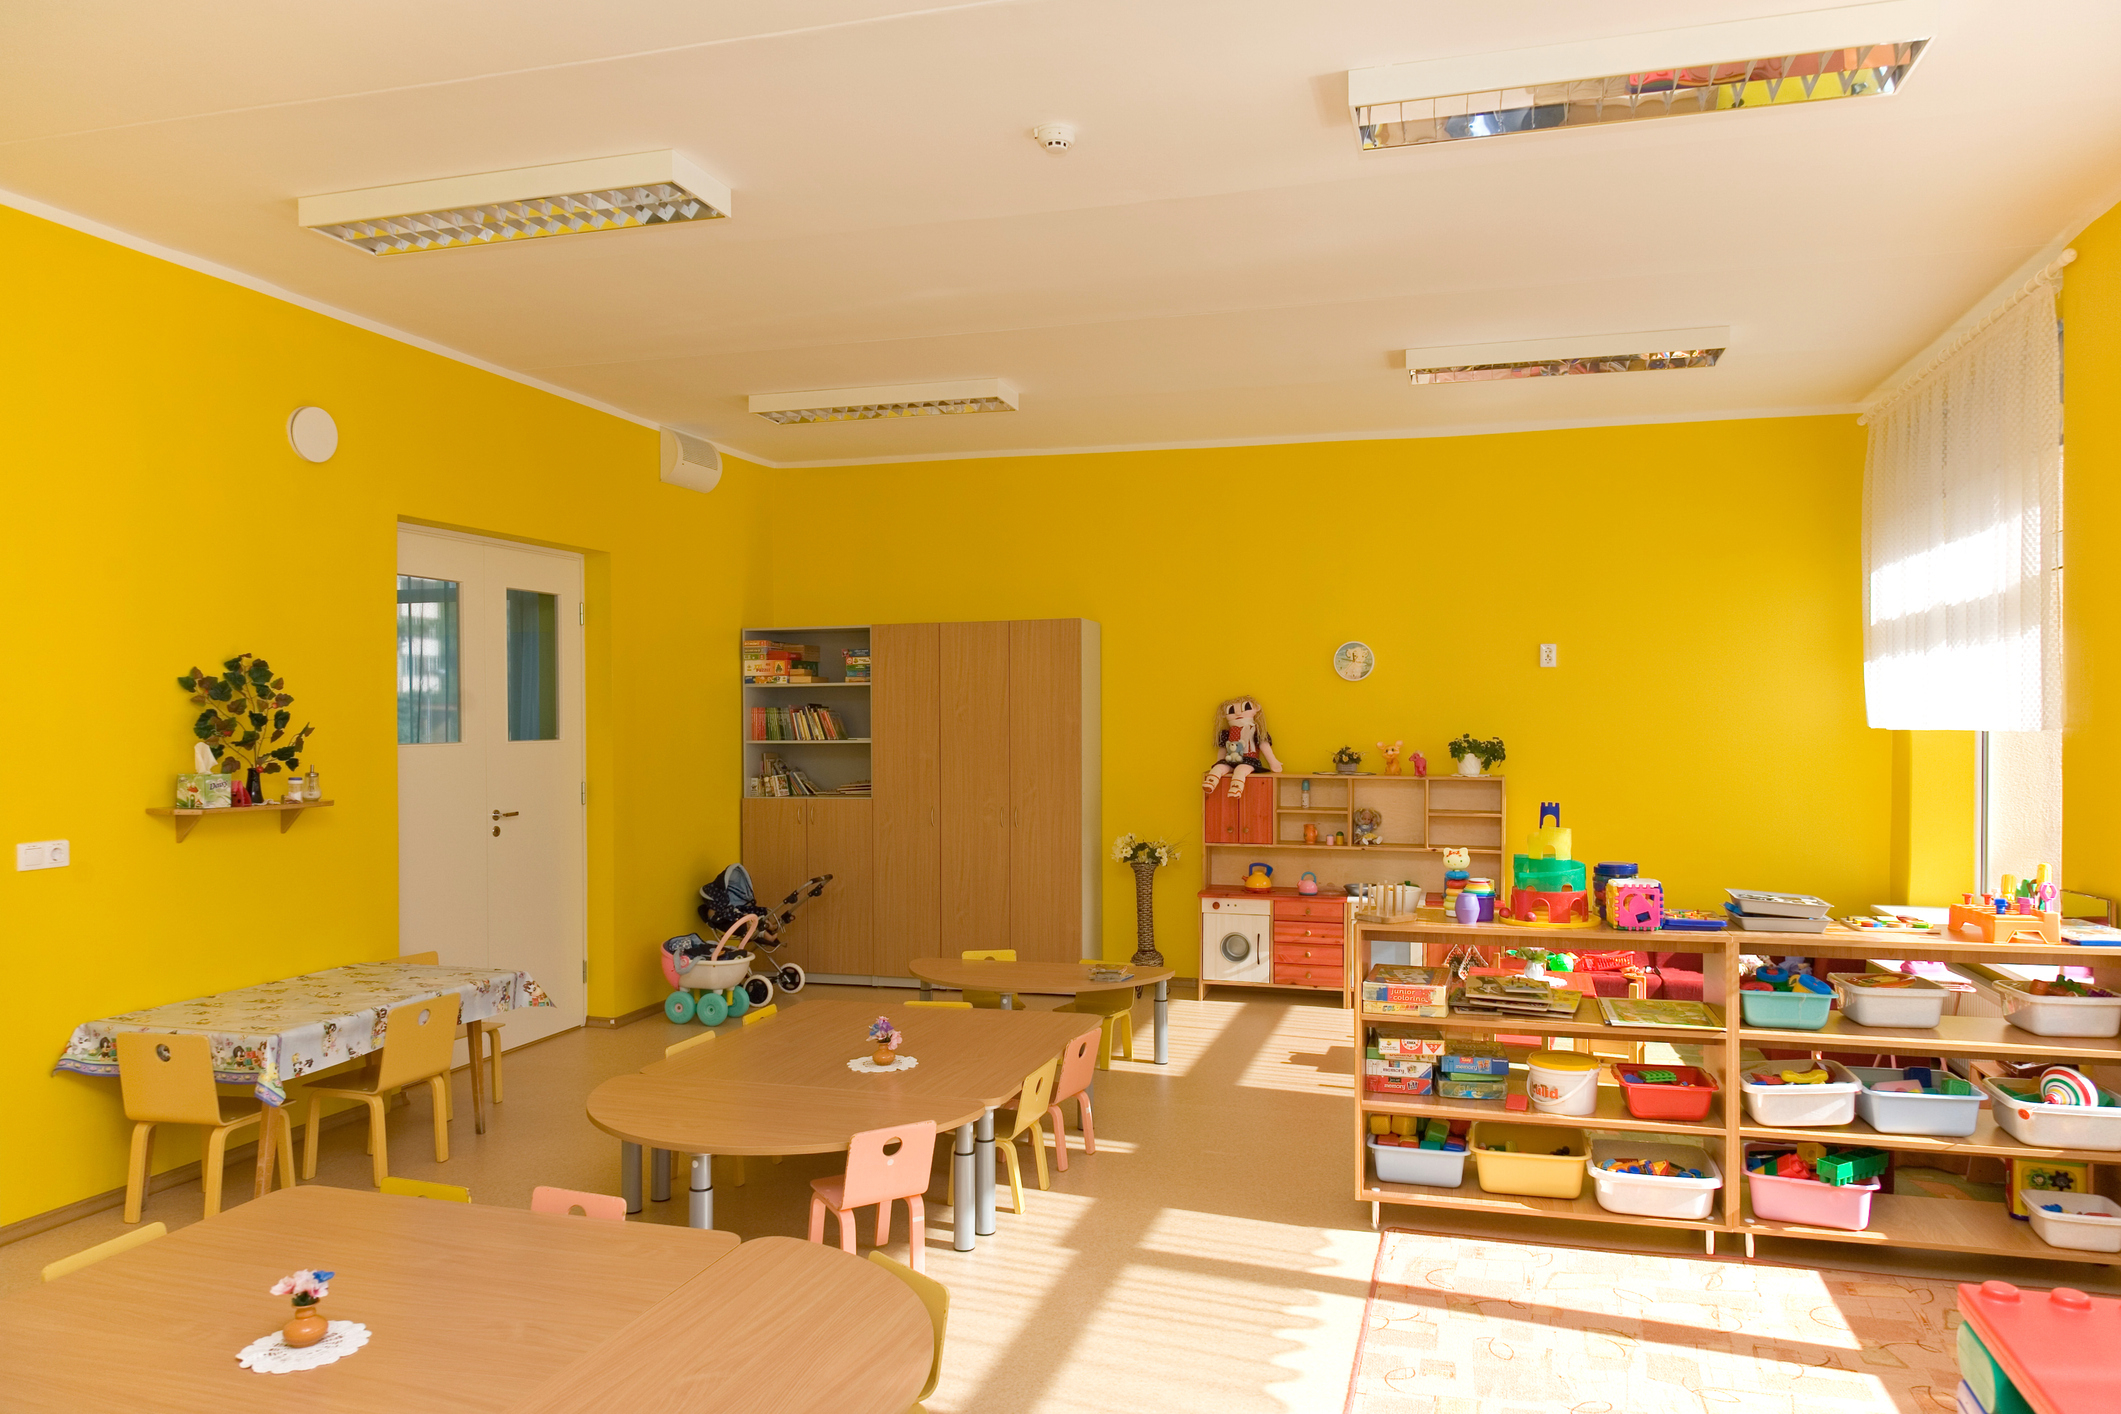 Brightly lit classroom with child-sized tables, chairs, and various educational toys and materials